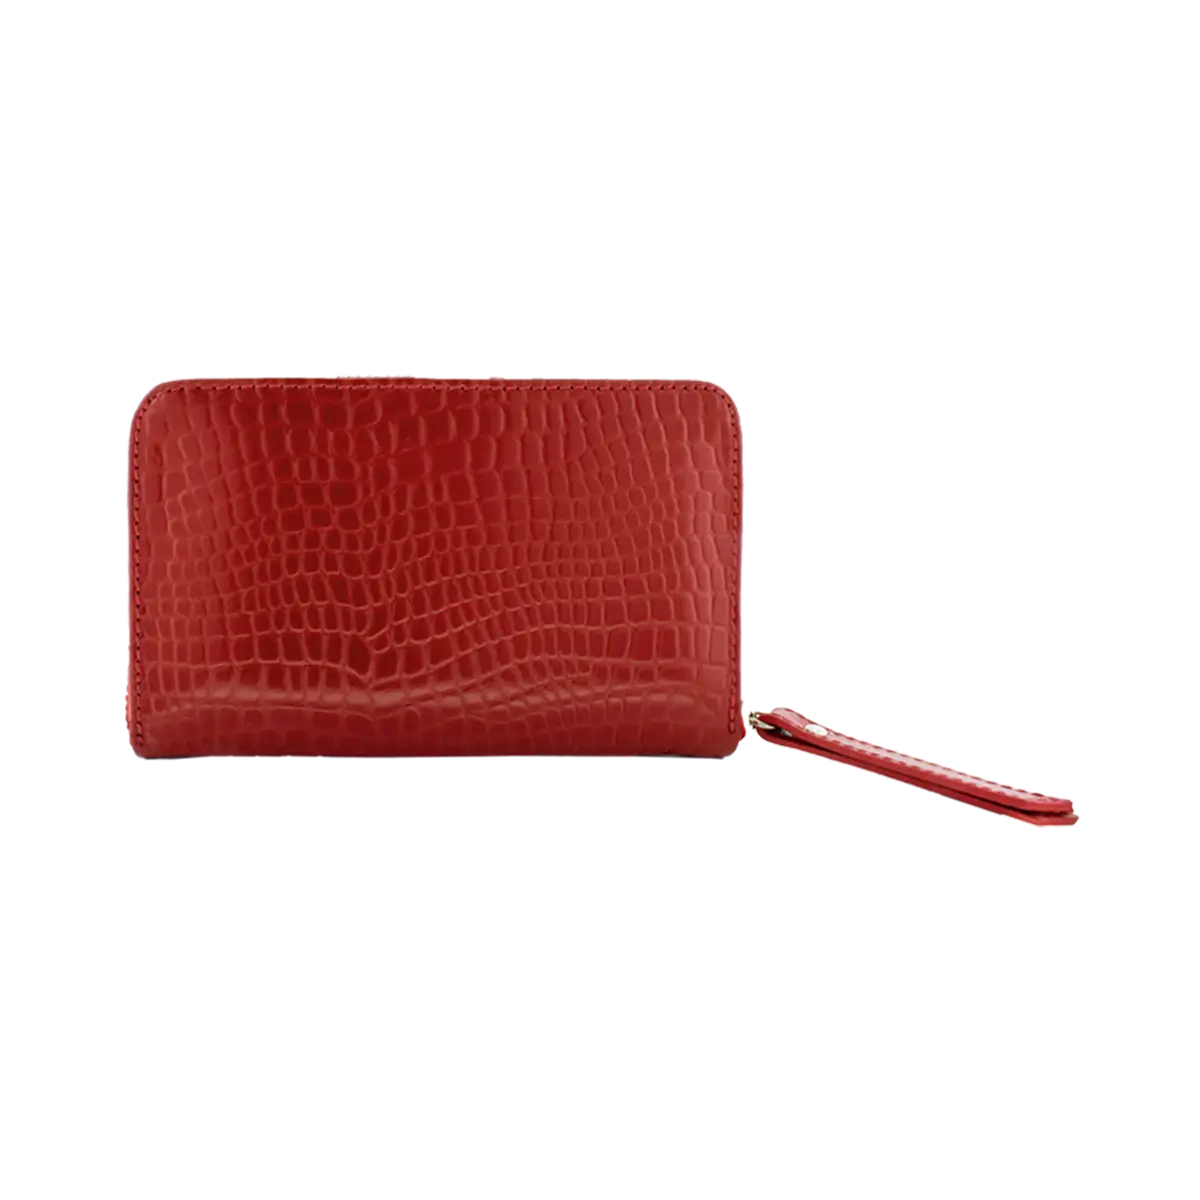 small red print leather wallet. Fashion Accessories for women in San Diego, CA.